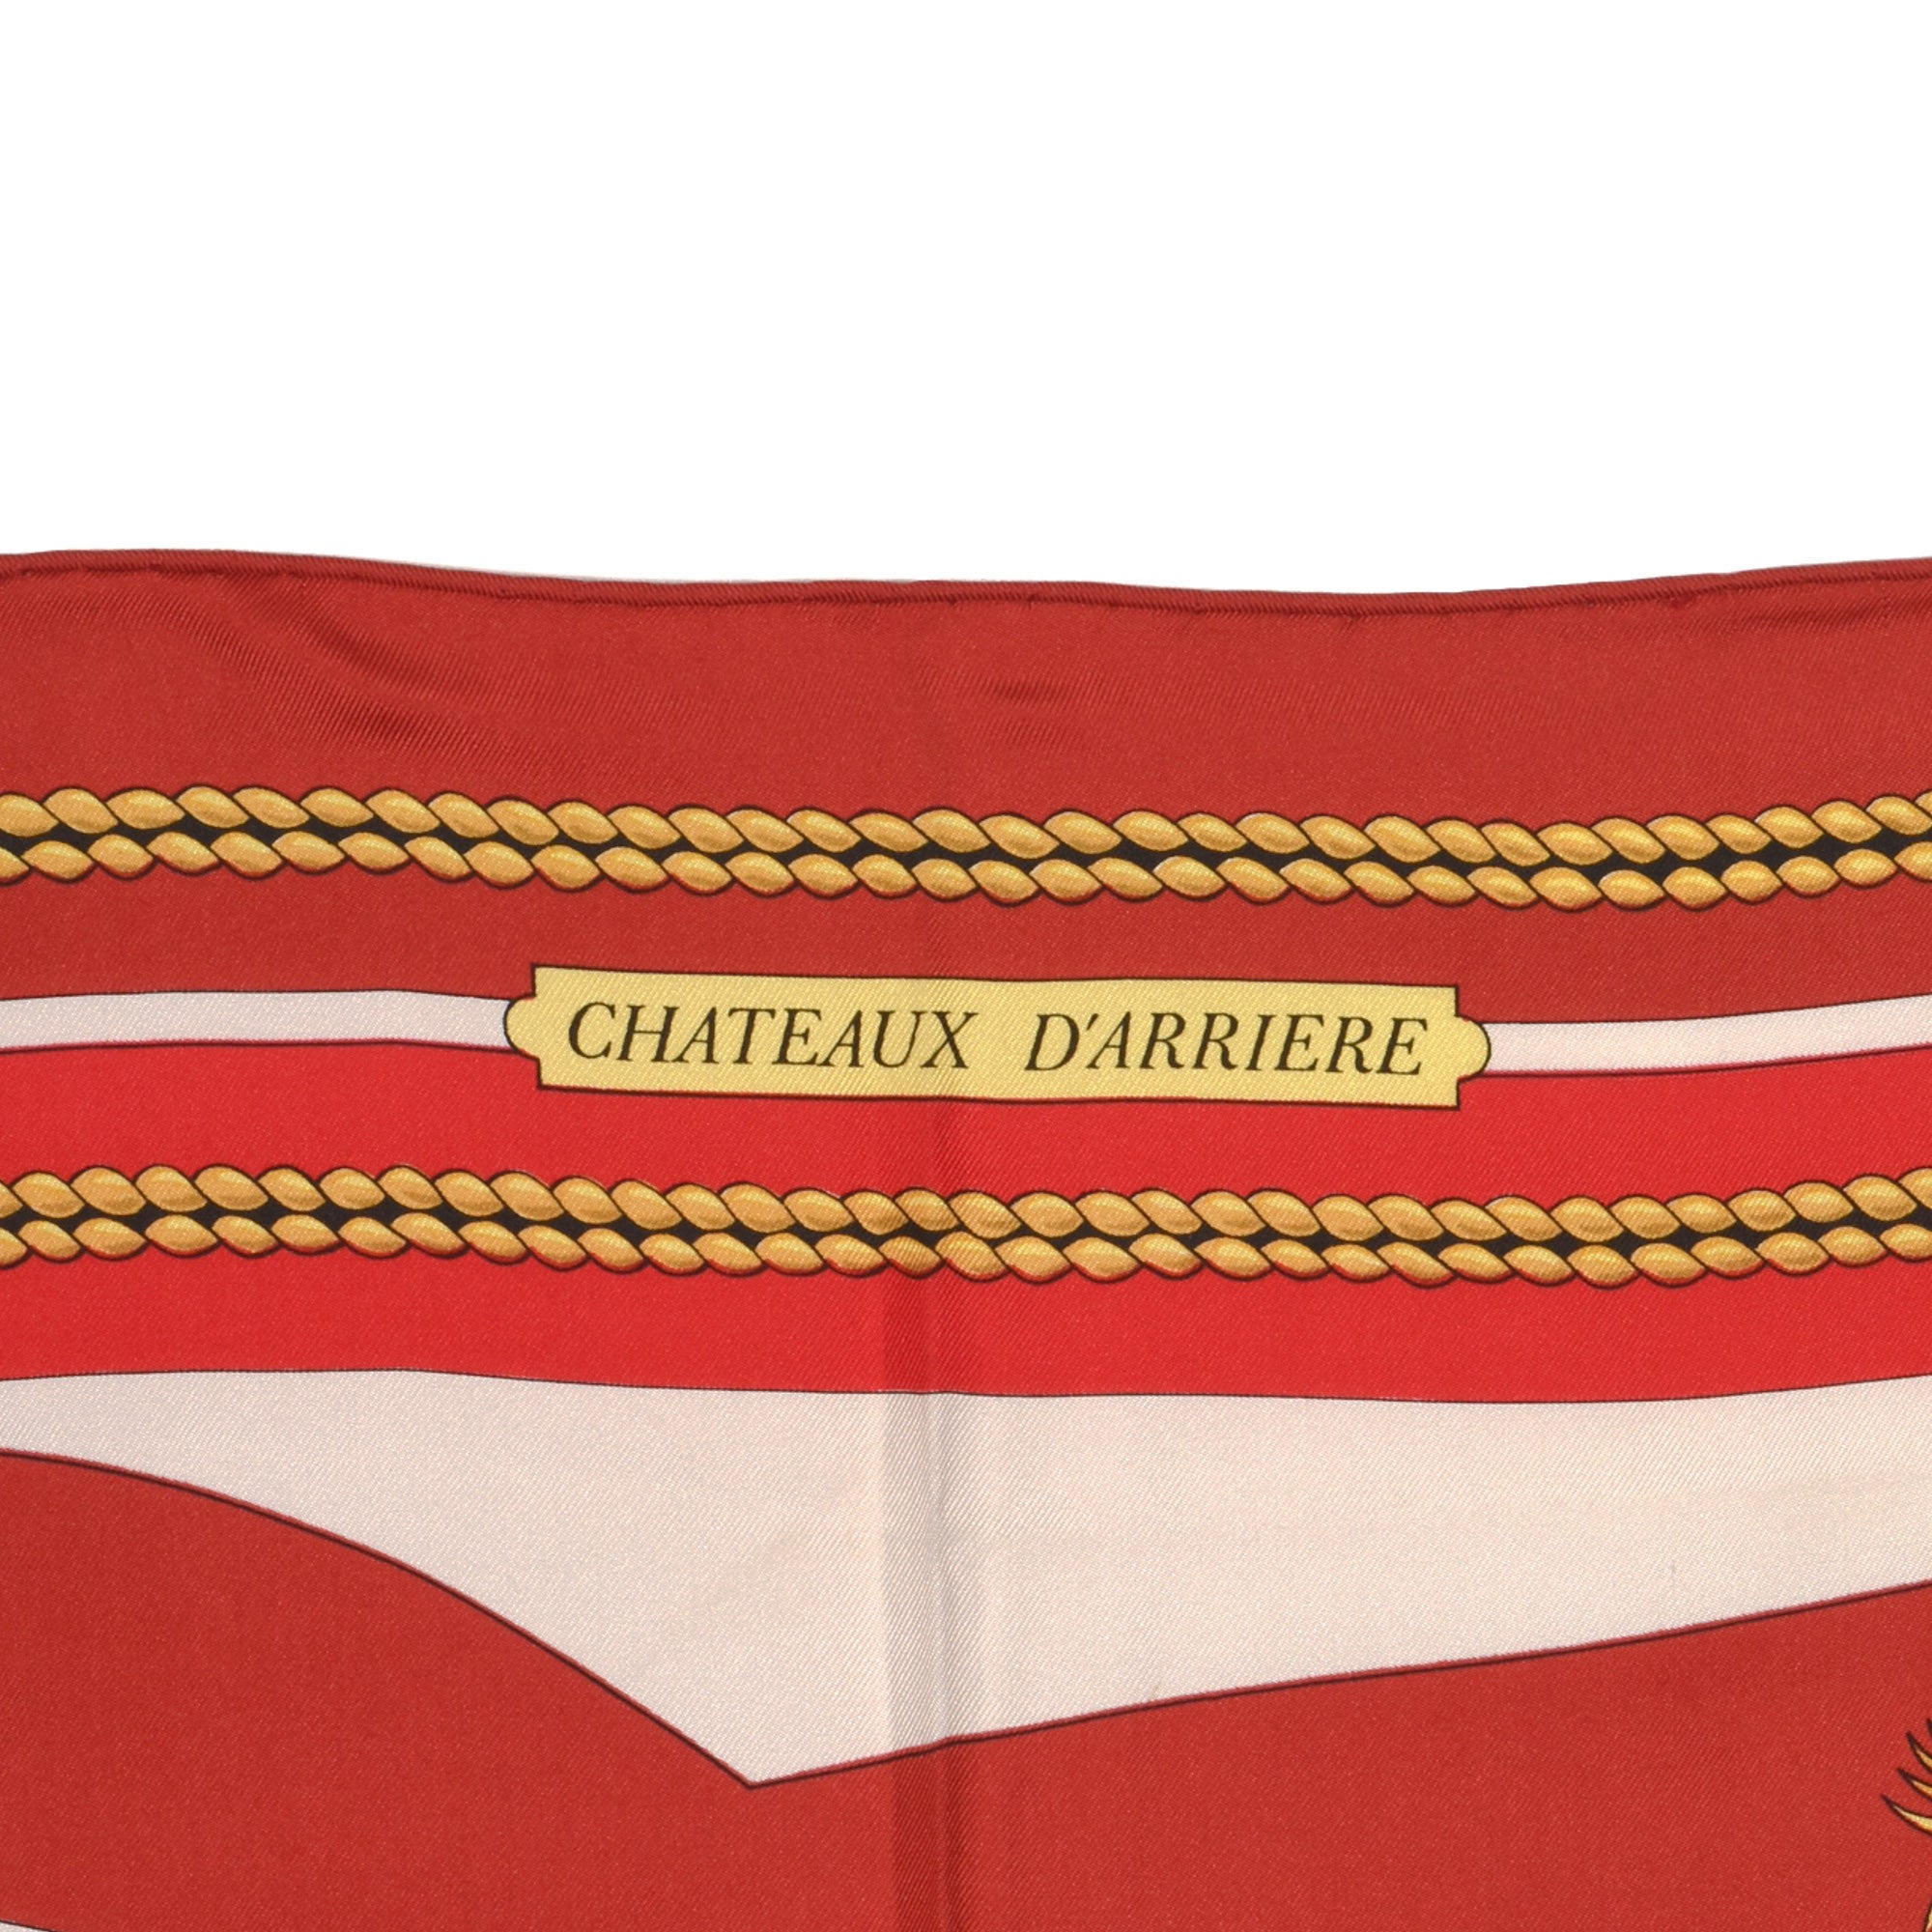 Chateaux D'arriere Silk Scarf